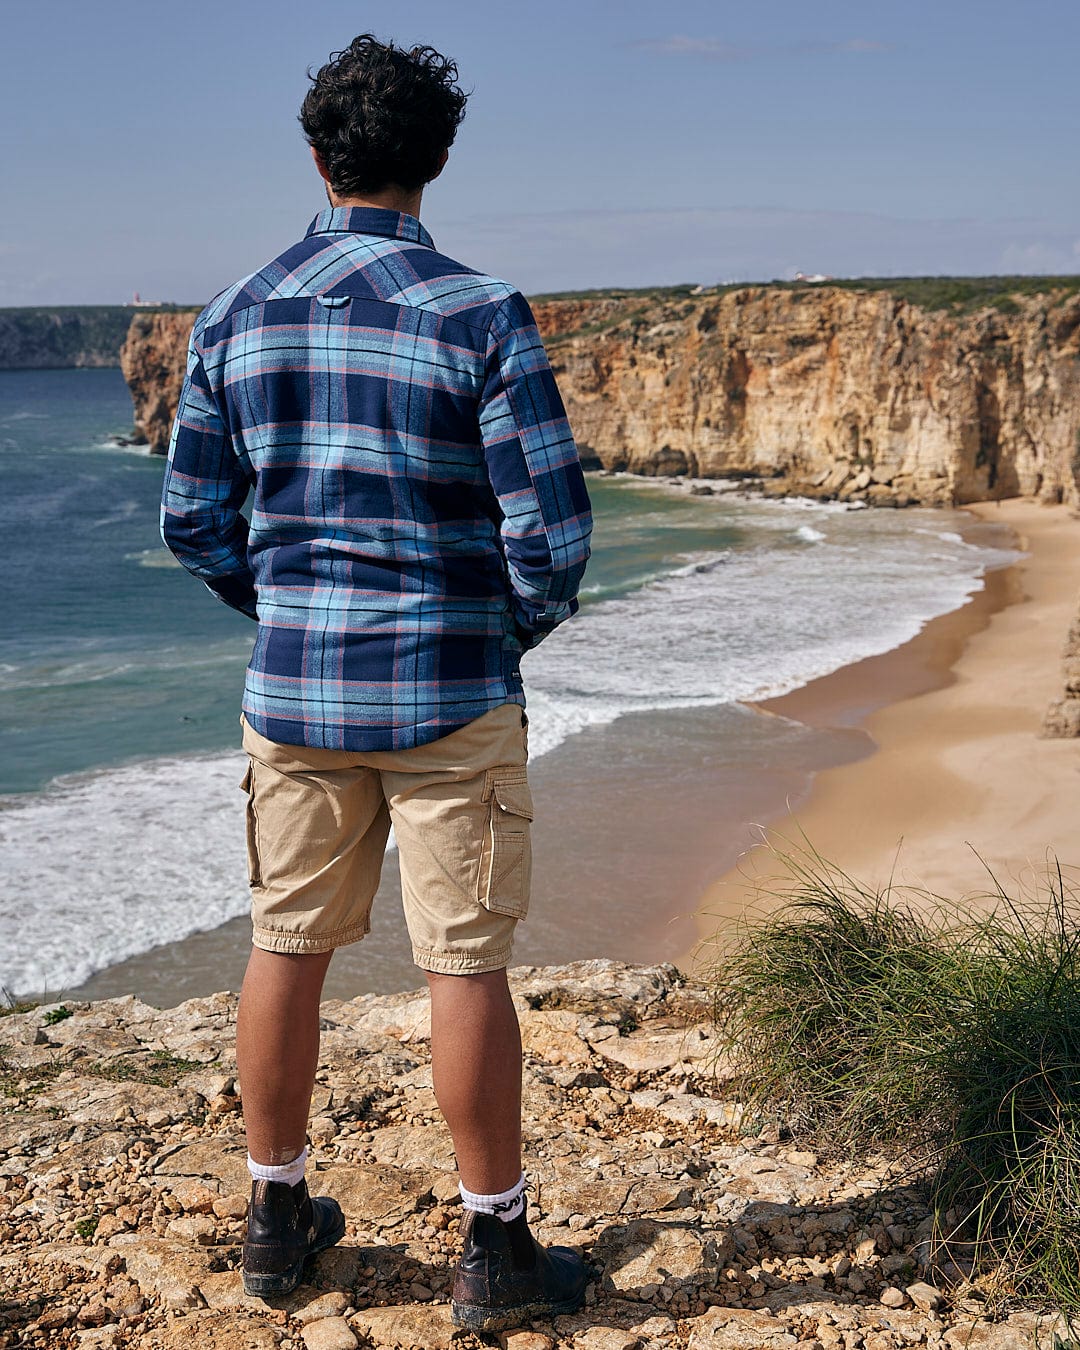 A man wearing the Saltrock Ocean - Mens Borg Lined Shirt - Blue Check standing on a cliff overlooking the ocean in winter.